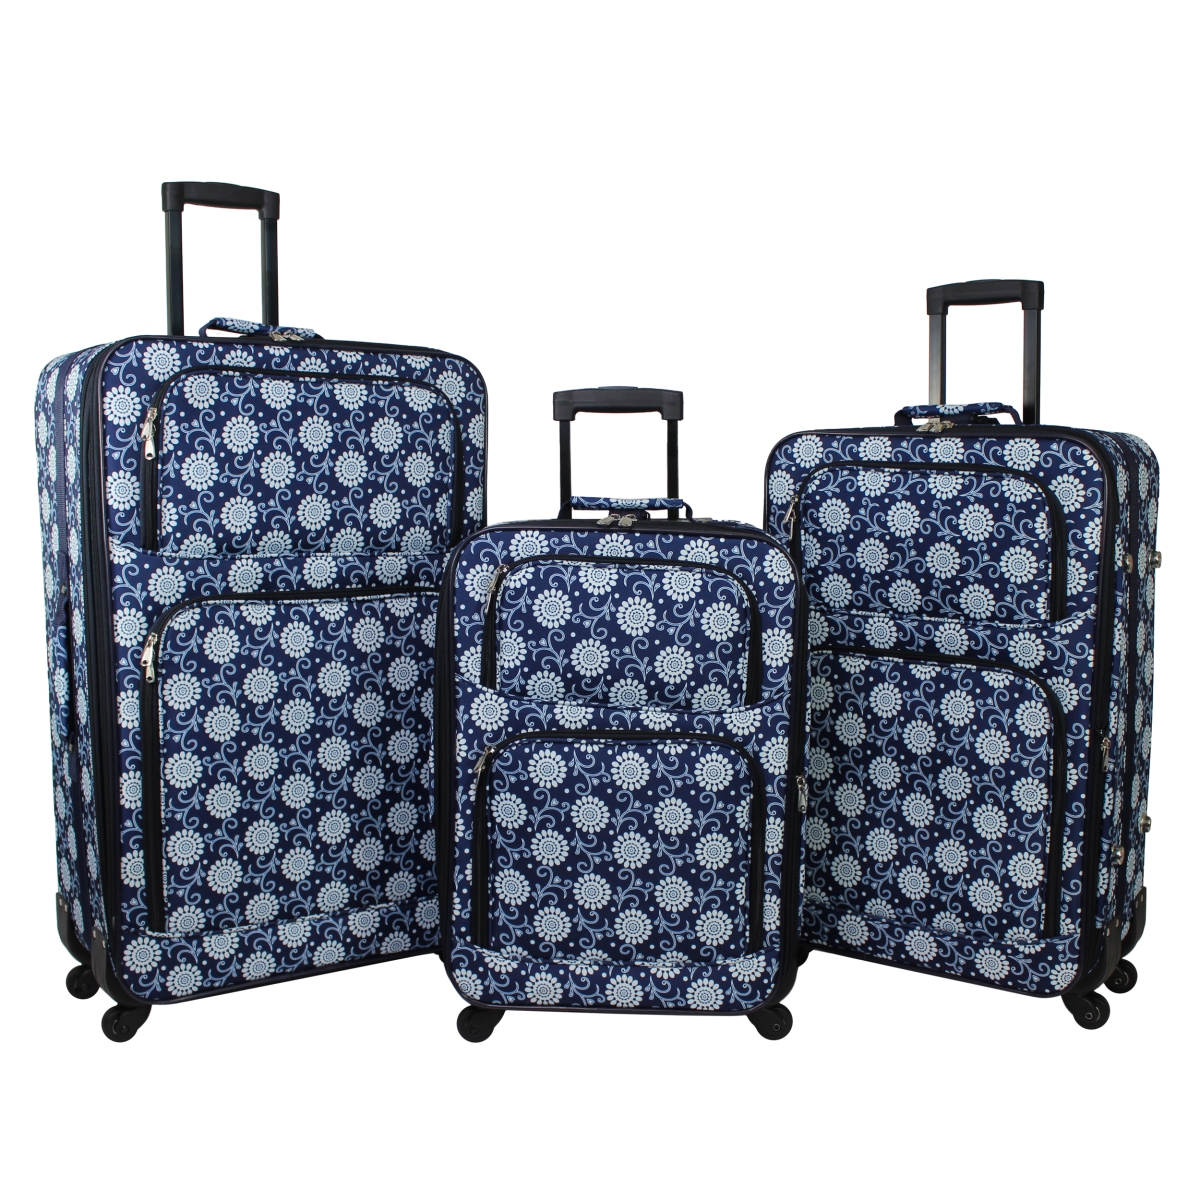 818703-229 Rolling Expandable Spinner Luggage Set - Navy Vines Floral, 3 Piece